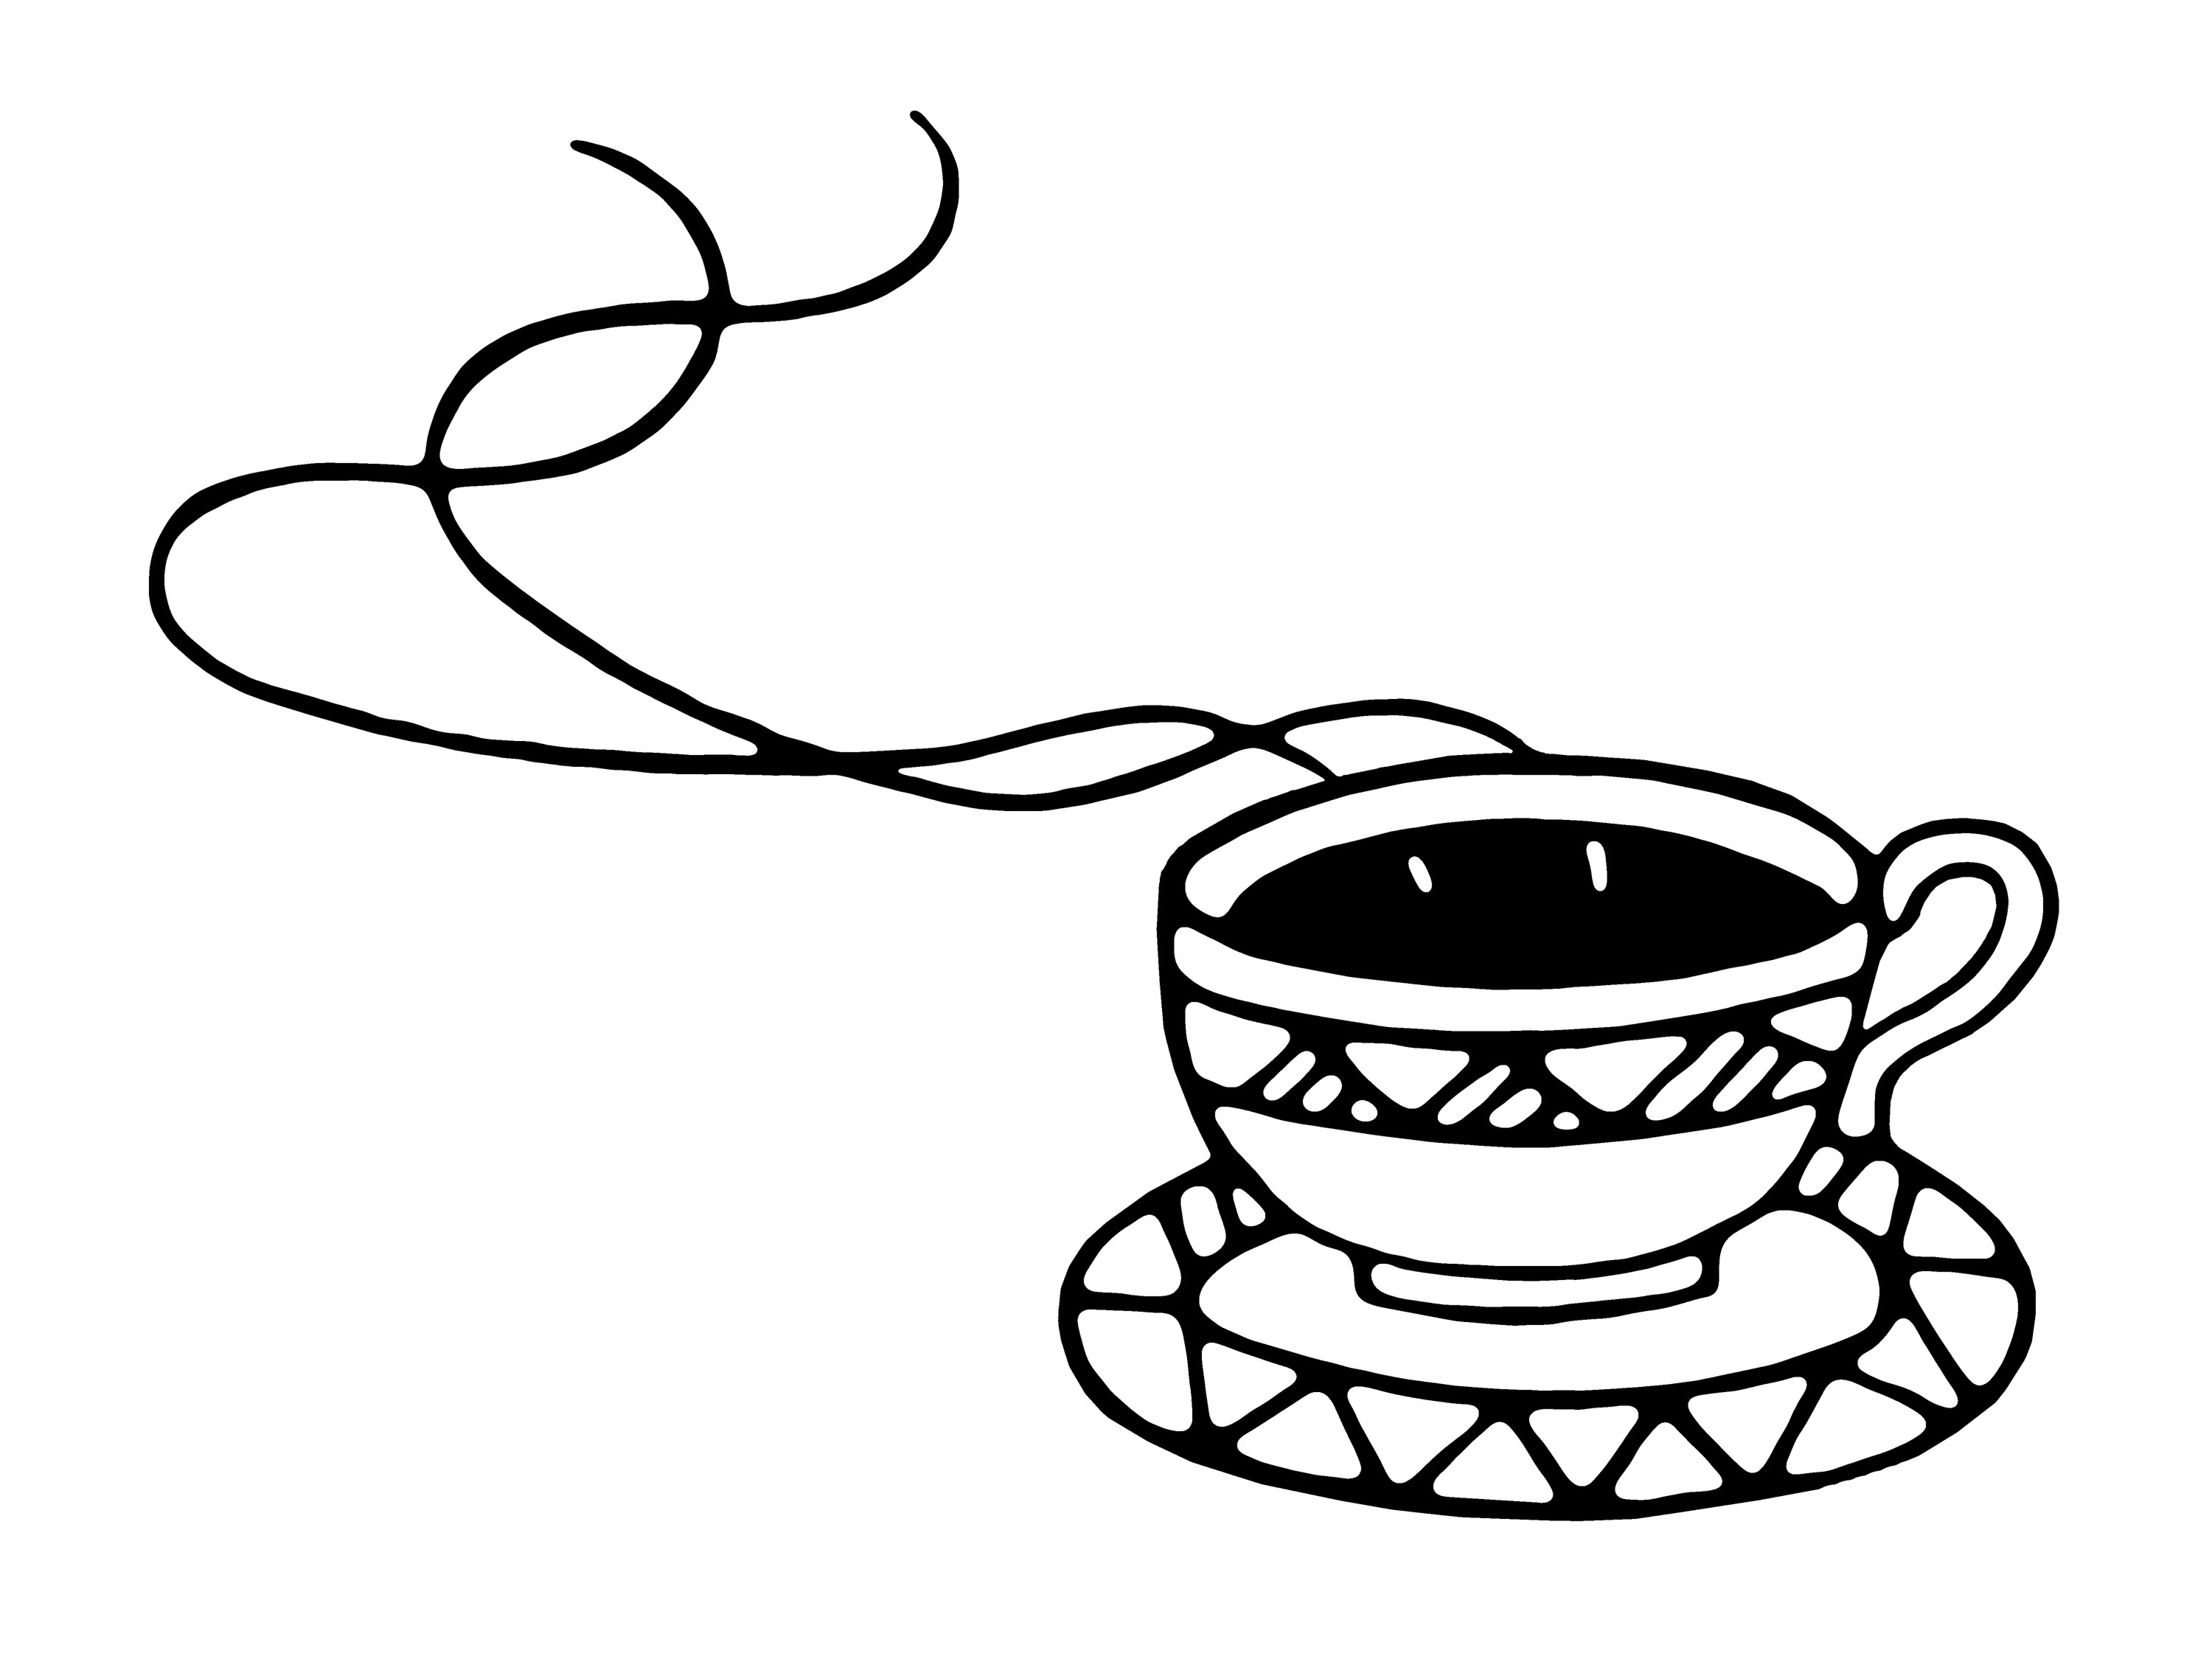 A tattoo design of a cup of coffee